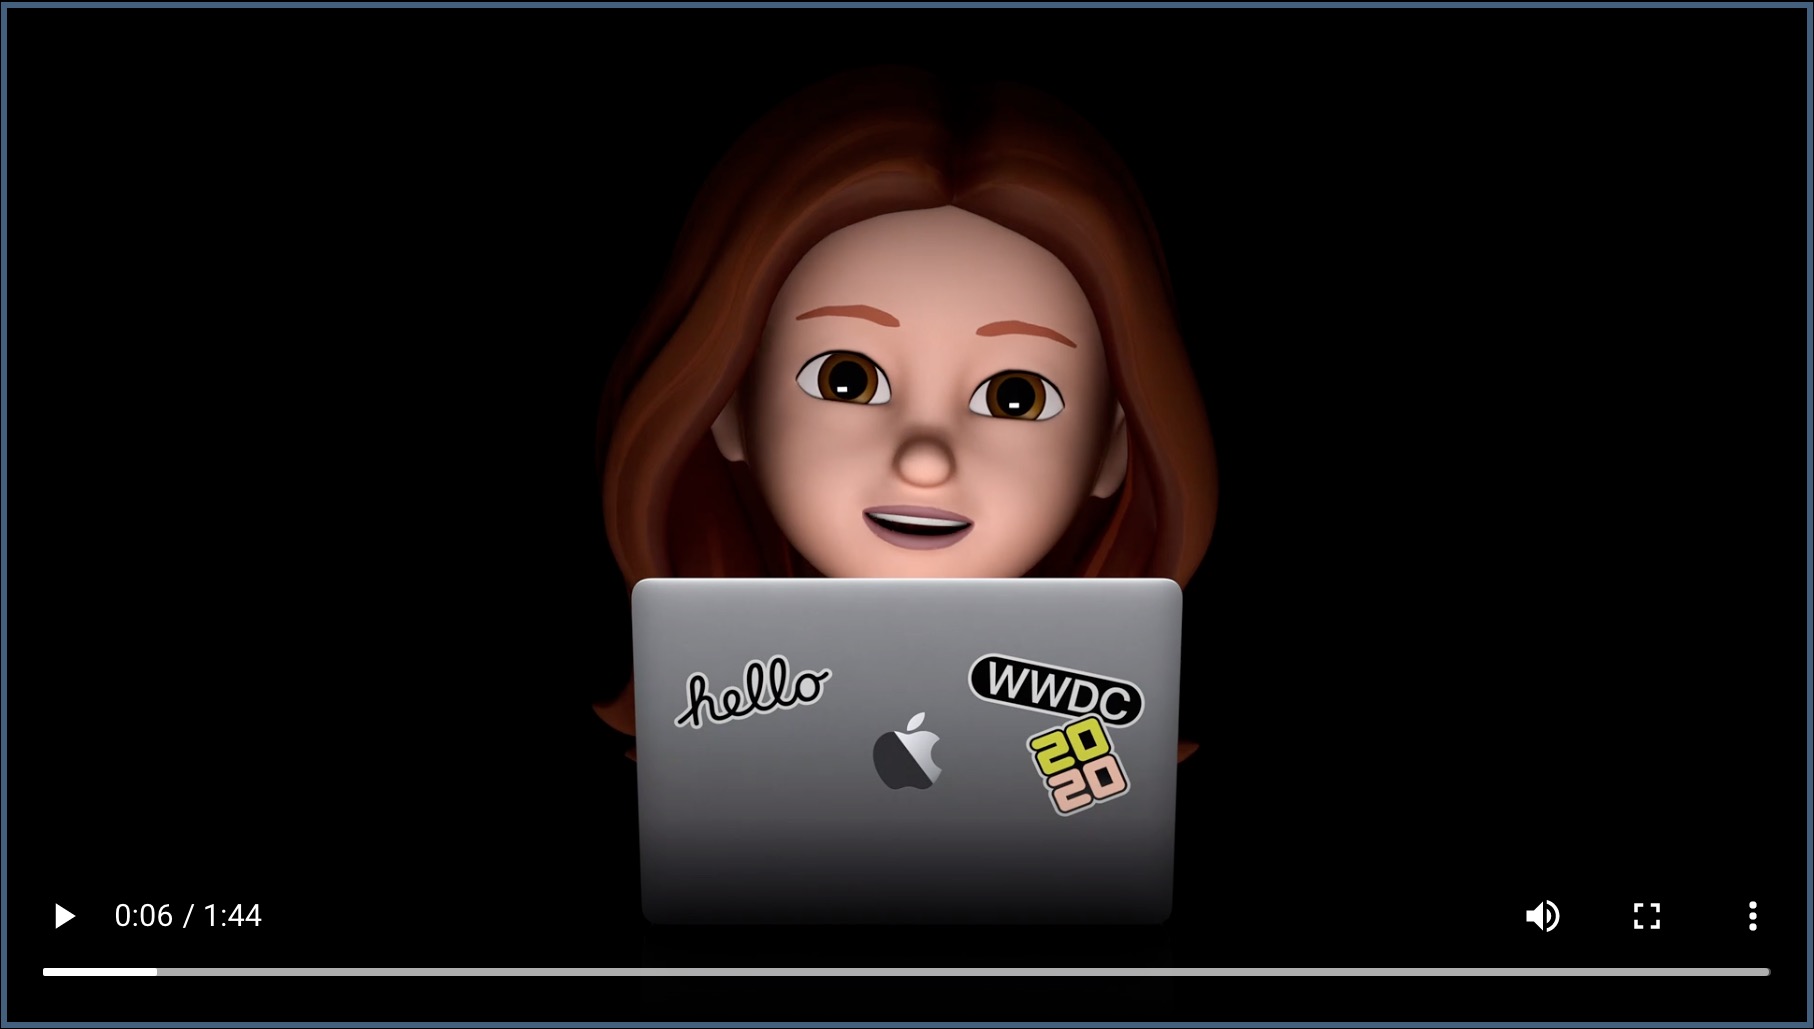 Serenity Caldwell Summarizes The Wwdc Keynote In Under 90 Seconds Tidbits